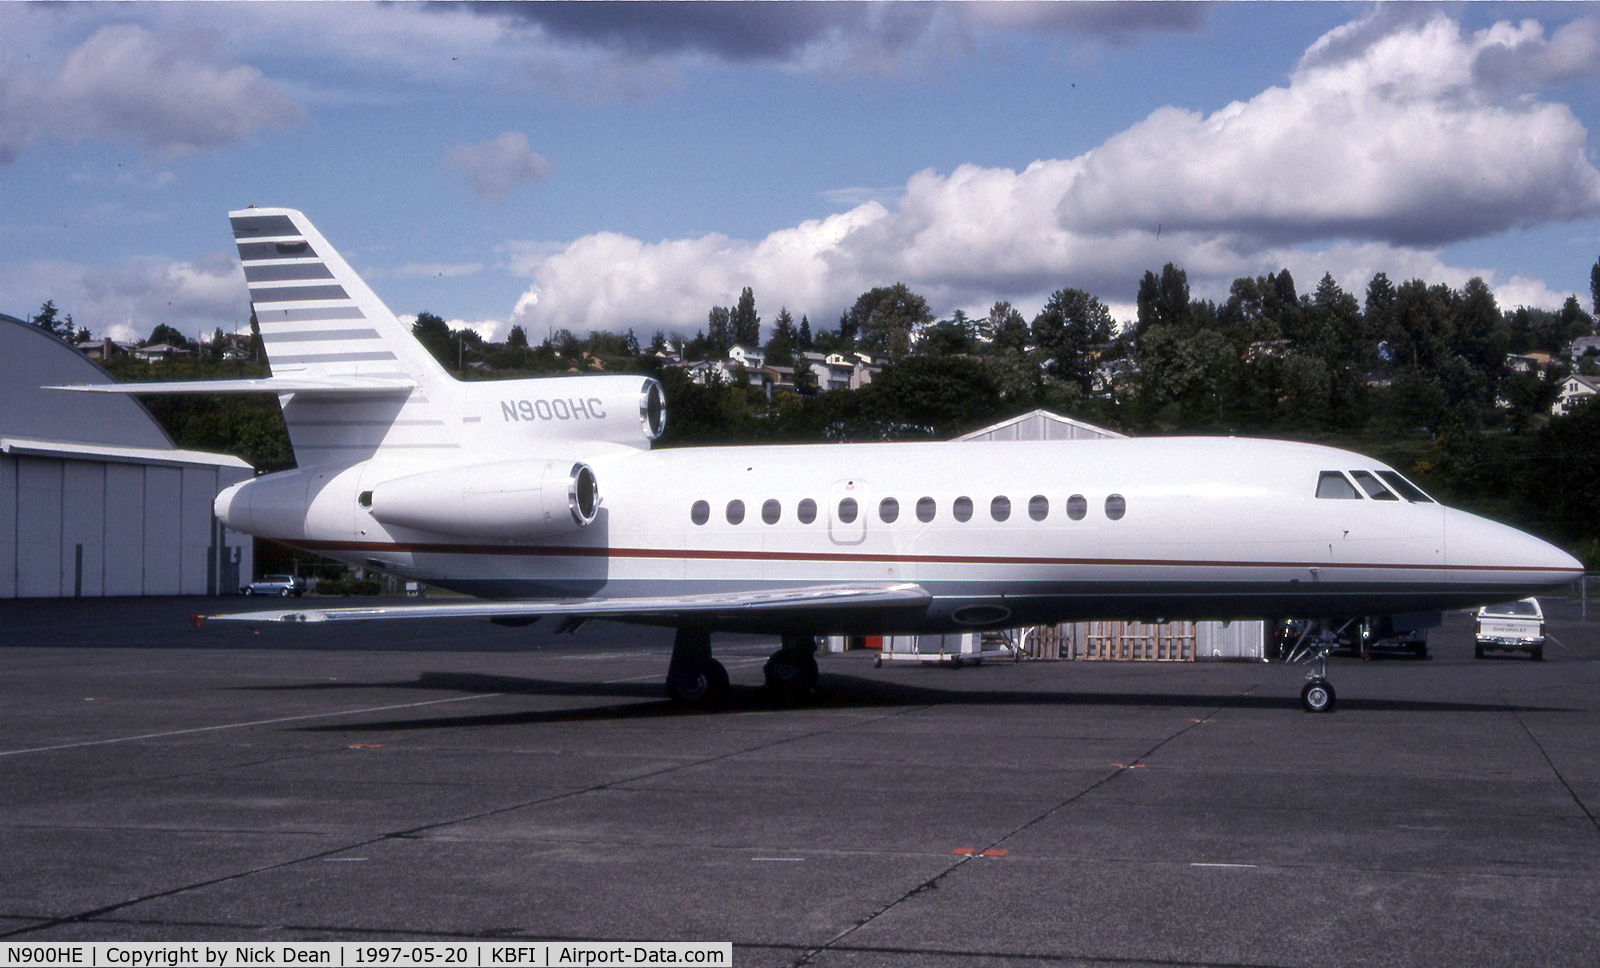 N900HE, 1988 Dassault-Breguet Falcon (Mystere) 900 C/N 68, Seen here as N900HC now carried by an EX this airframe is currently registered N900HE as posted